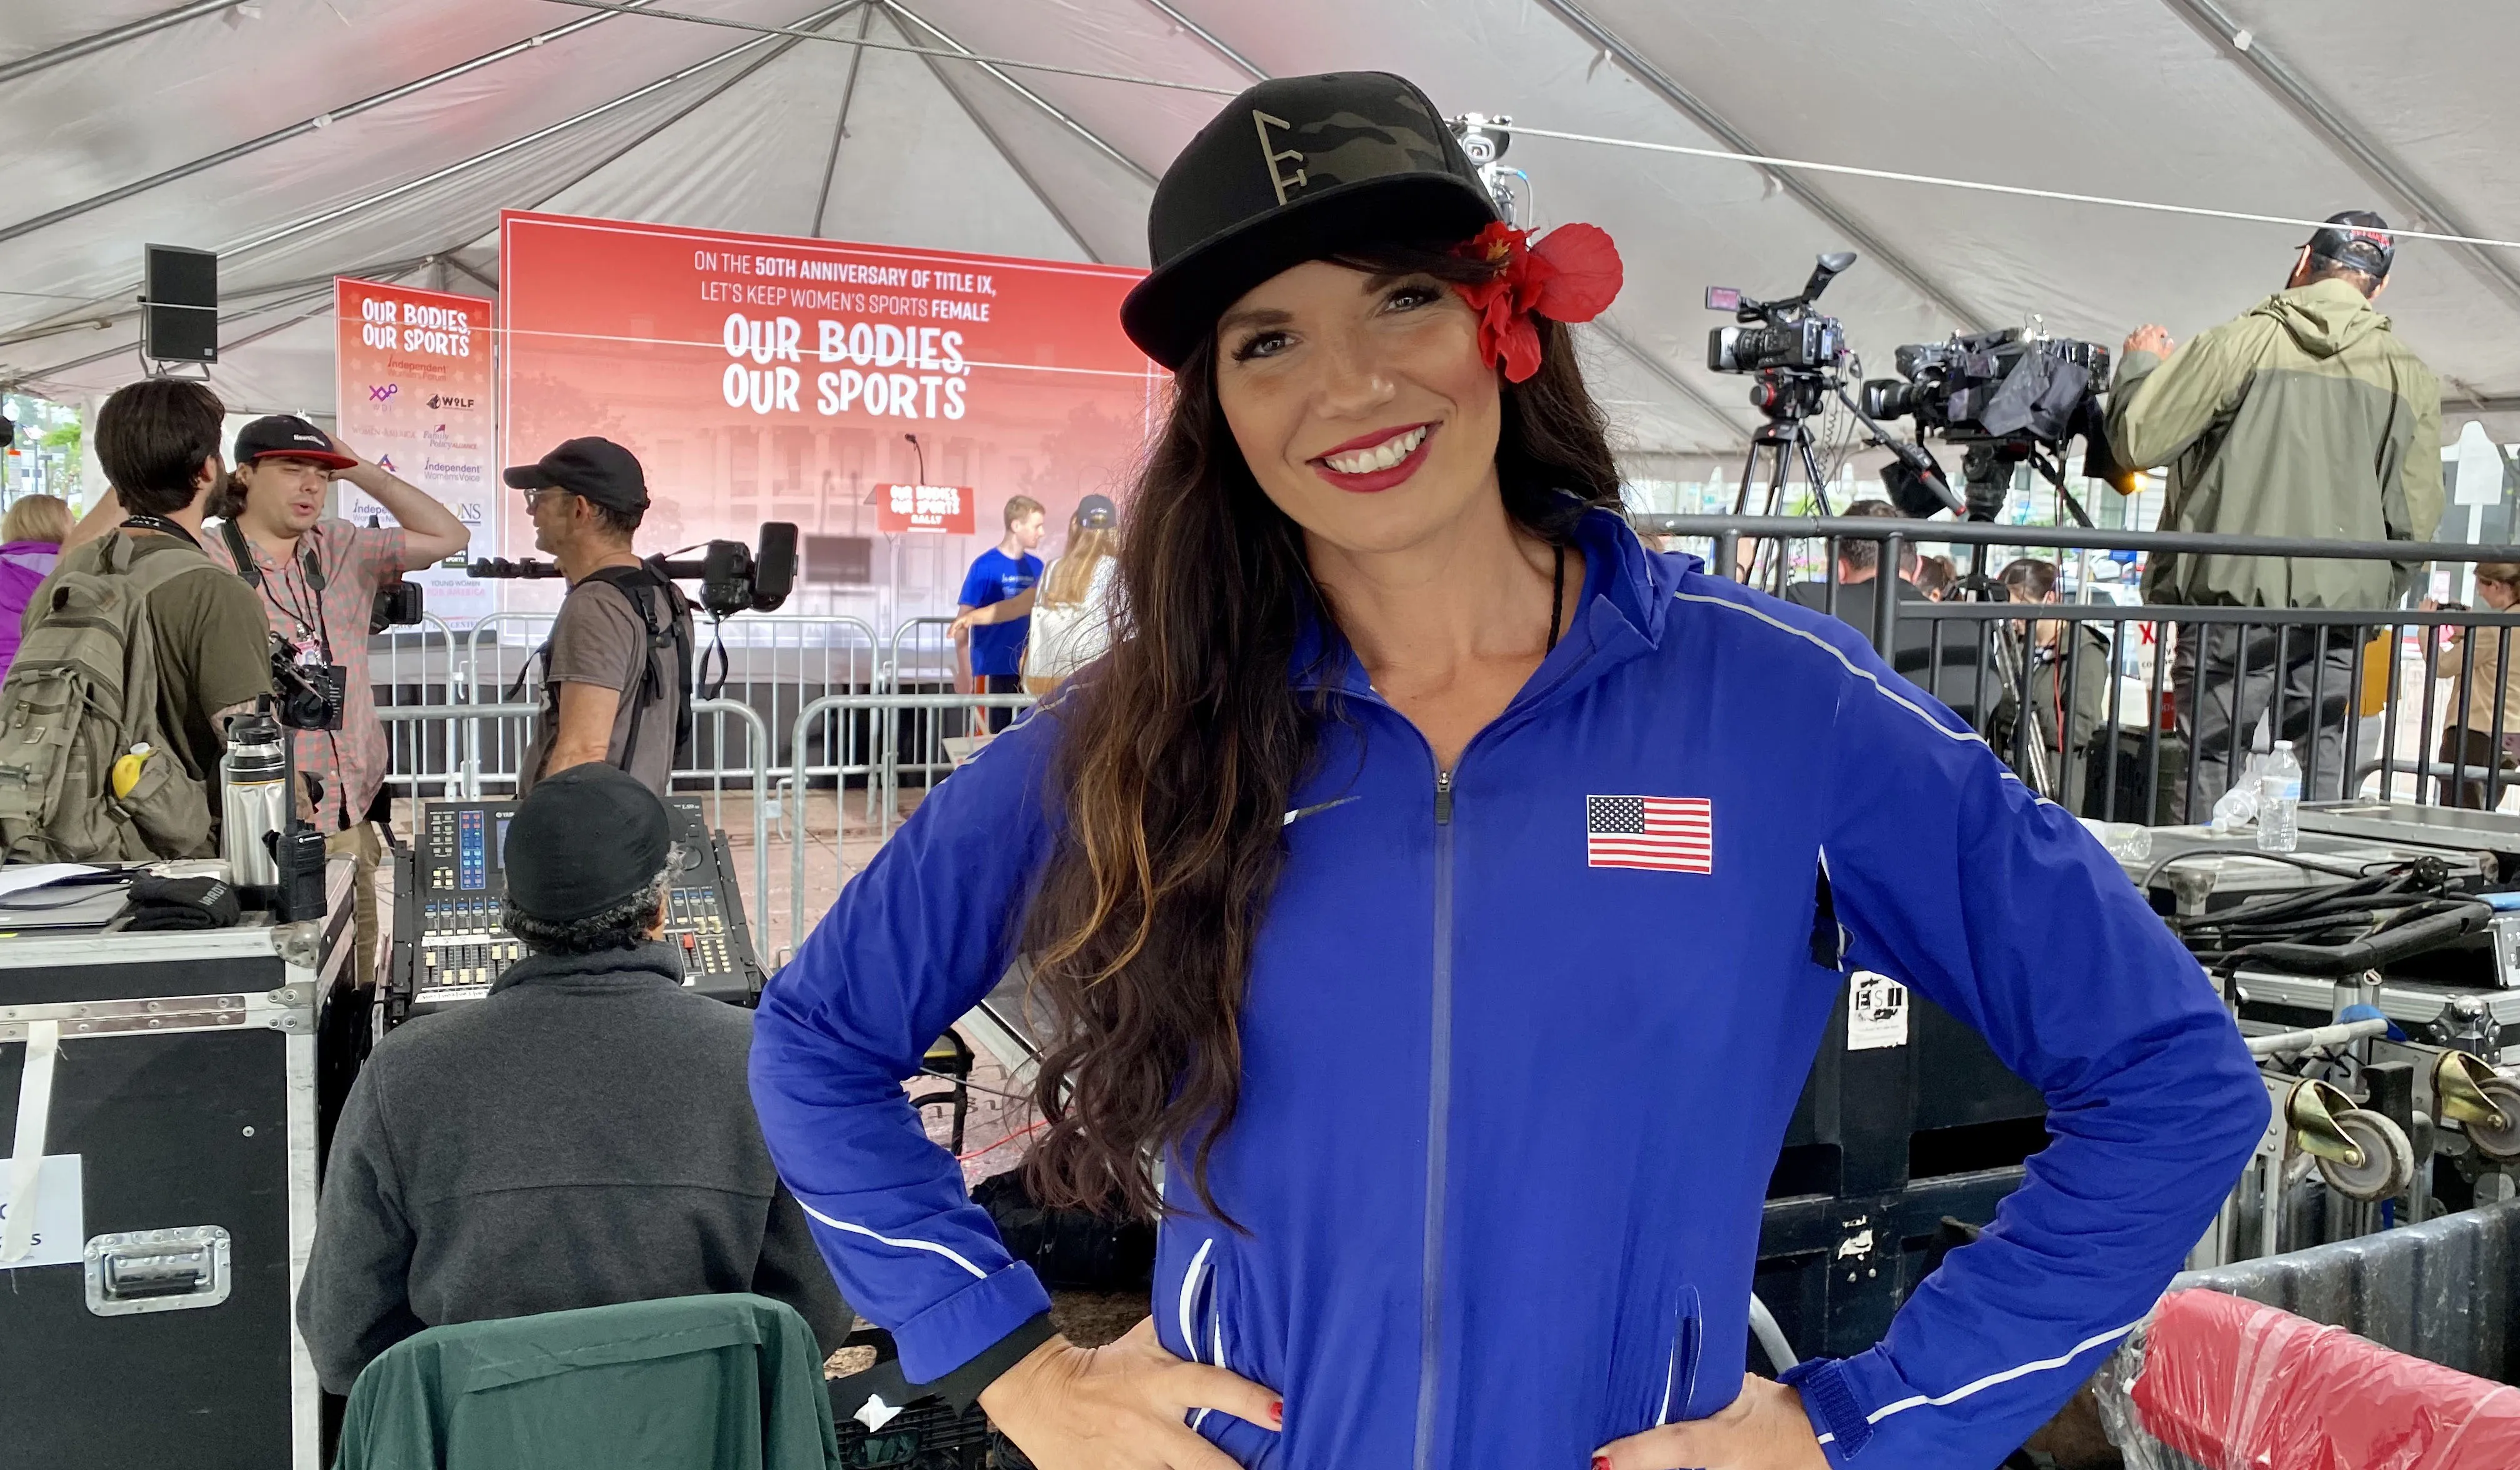 Cynthia Monteleone, shown at the "Our Bodies, Our Sports" rally in Washington, D.C., on June 23, 2022. The mother of three is a track coach, a Team USA World Masters track champion, and an advocate for the preservation of women’s sports.?w=200&h=150